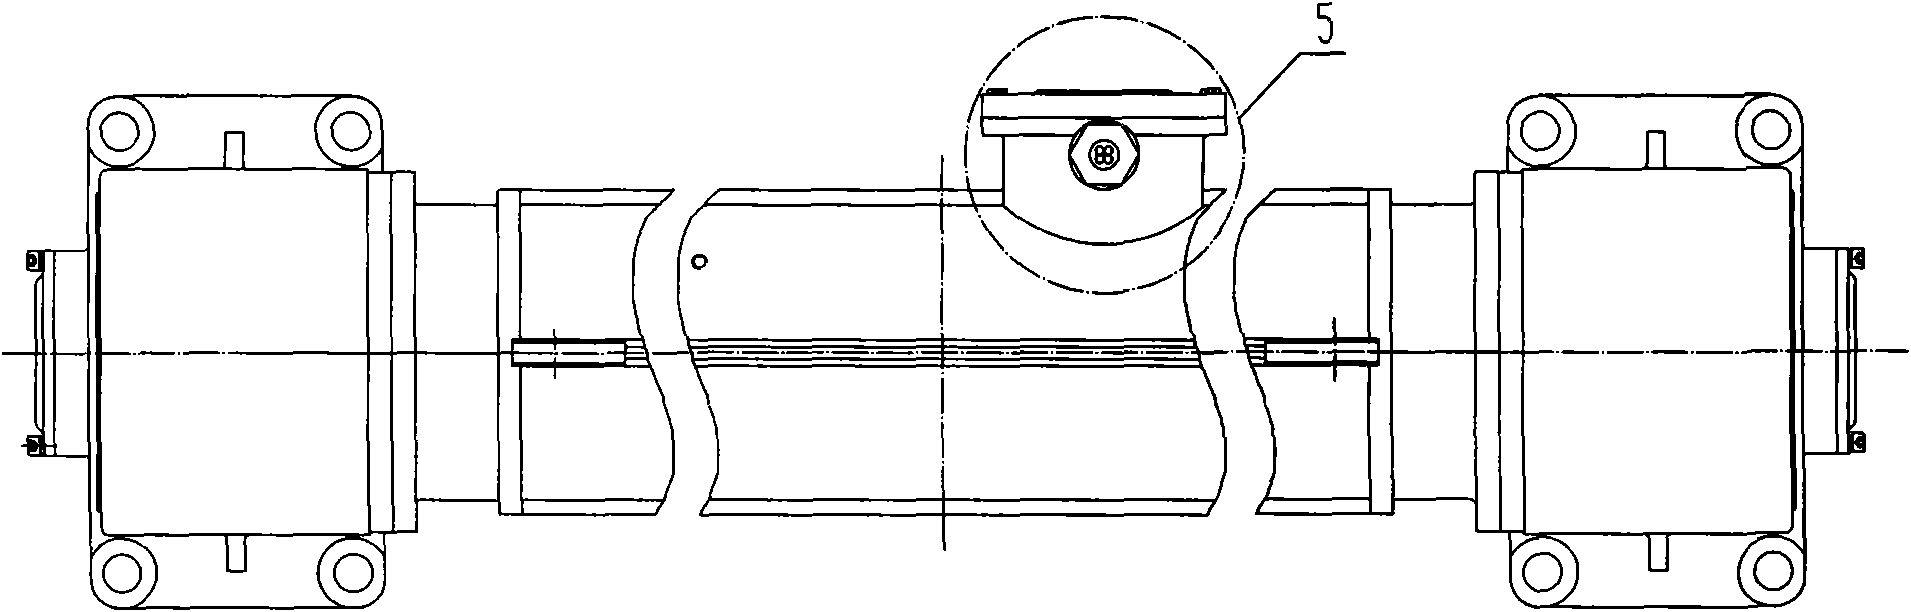 Three-joint three-phase asynchronous flame proof vibrating motor